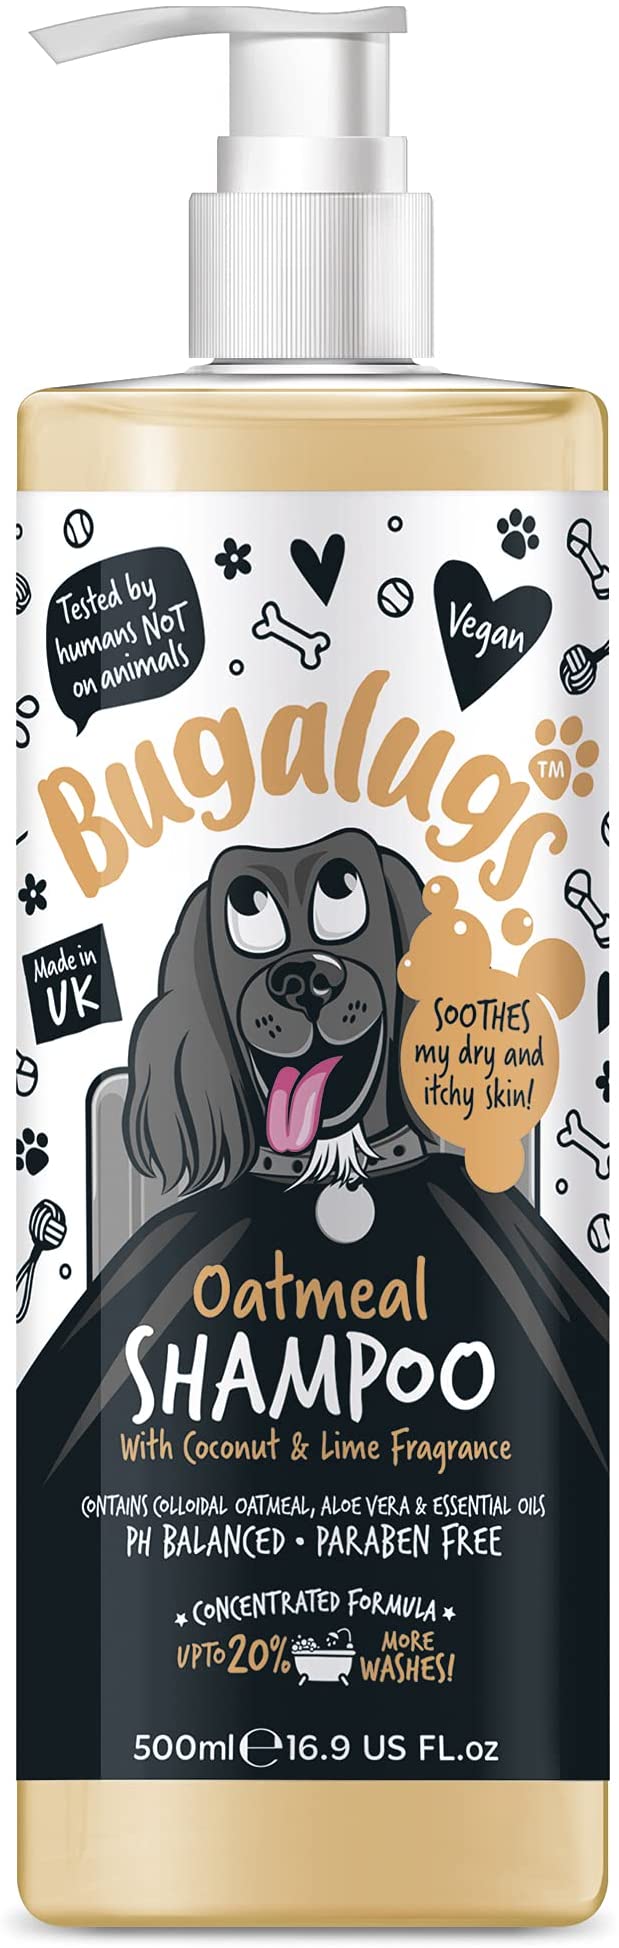 BUGALUGS Oatmeal & Aloe Vera Dog Shampoo Dog Grooming Shampoo Products for Smelly Dogs with Fragrance